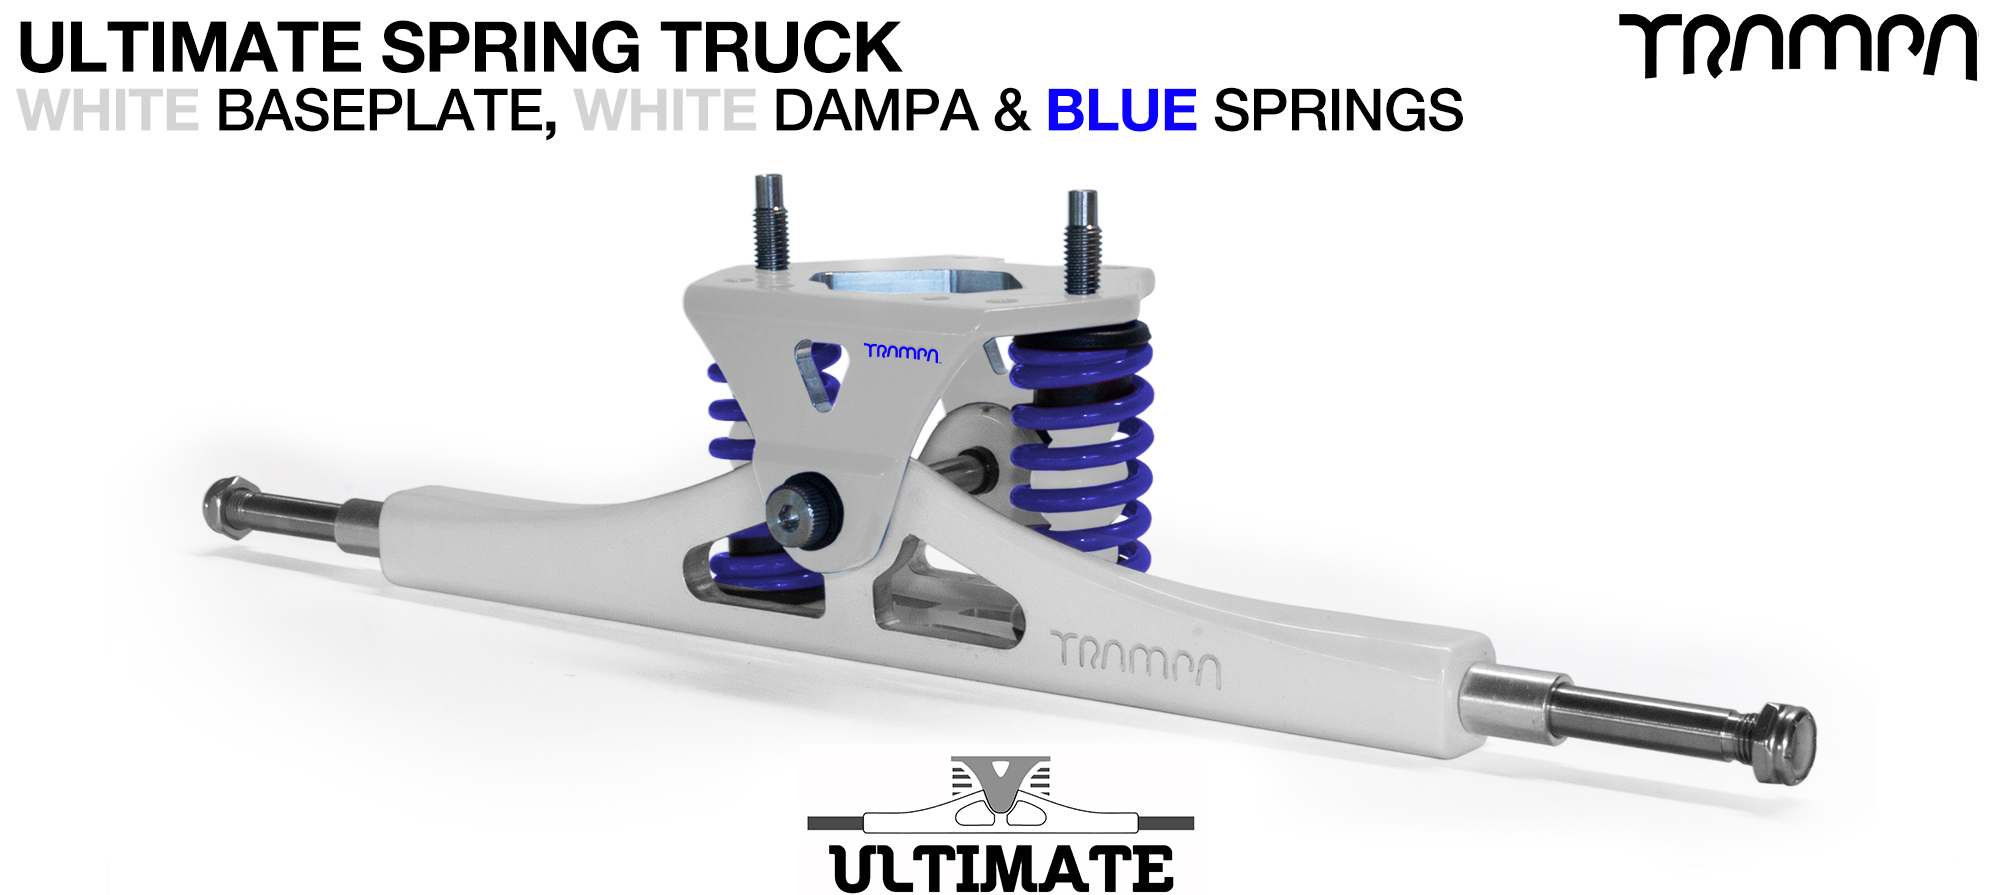 ULTIMATE ATB TRUCK - WHITE ATB Hanger with TITANIUM Axles & Kingpin & WHITE with BLUE logo Baseplate  